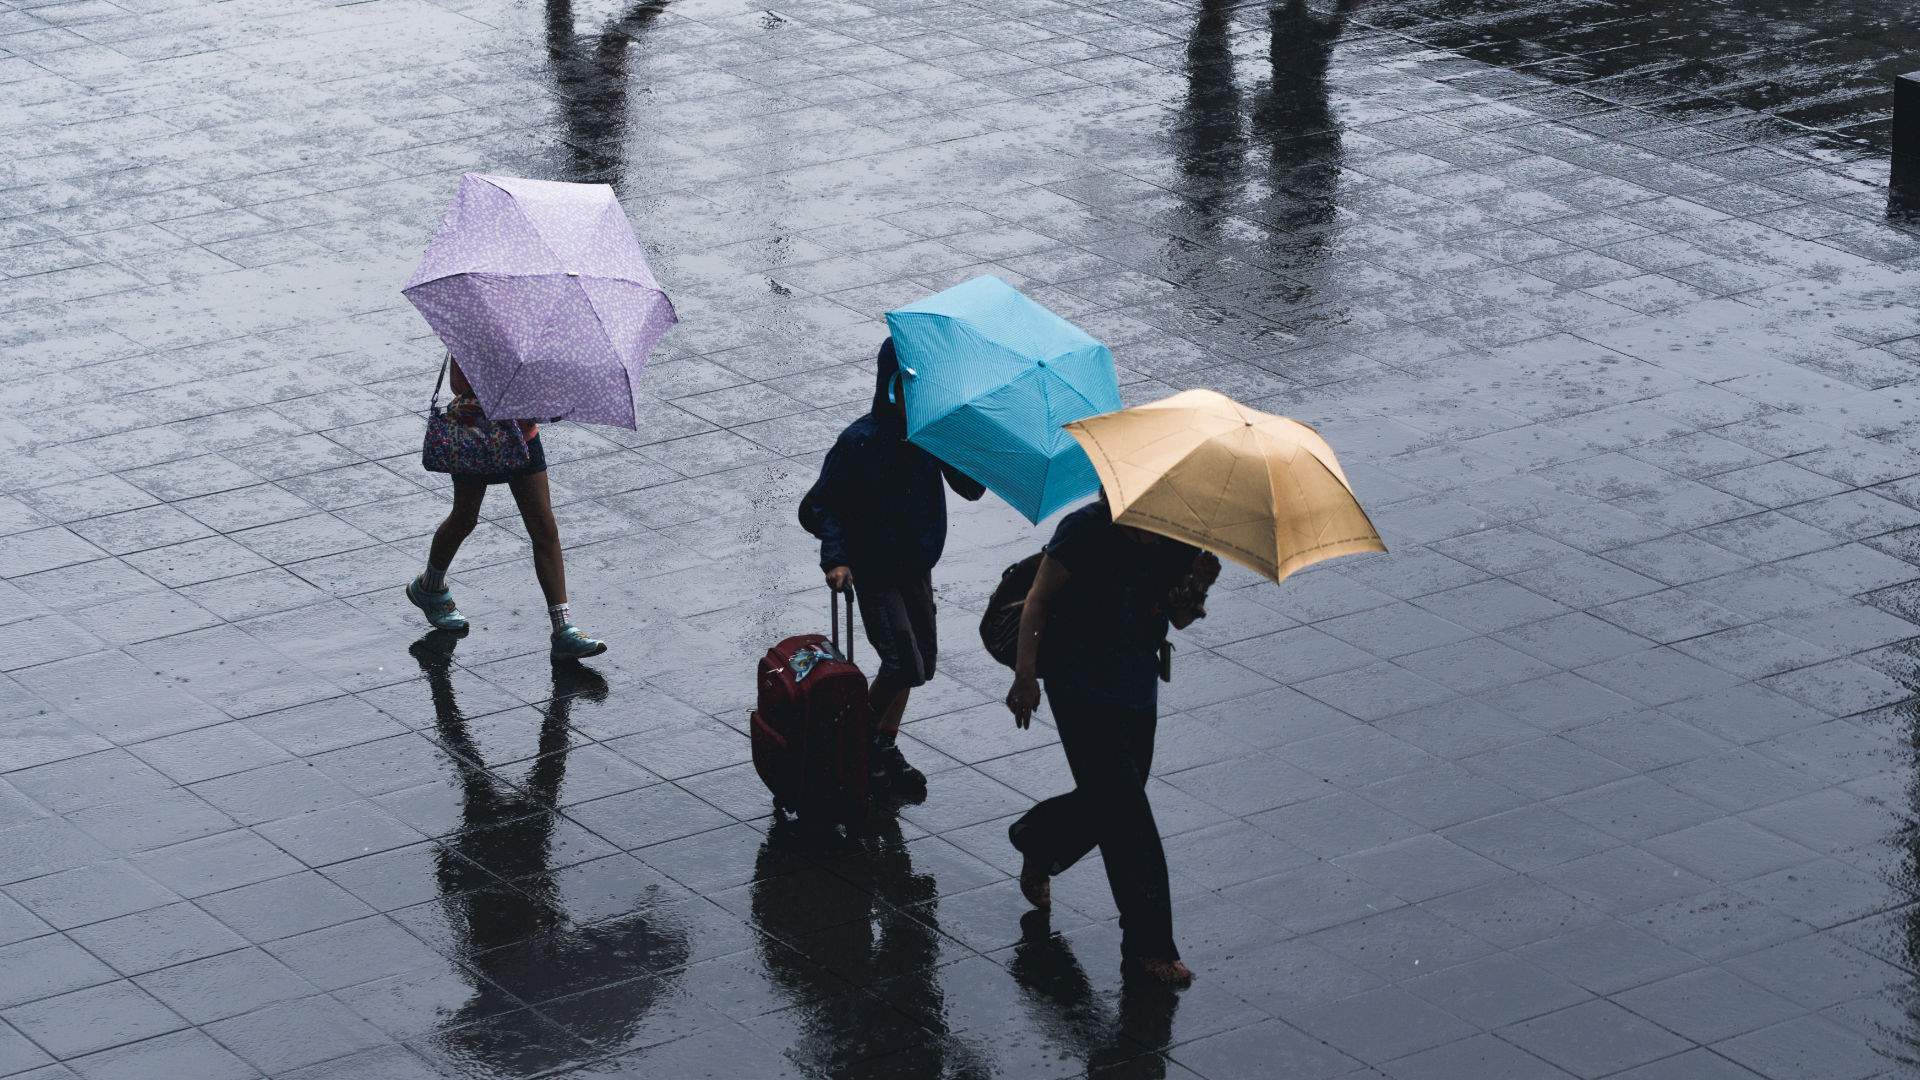 A Severe Thunderstorm Warning Has Been Issued for Sydney So Stay Safe and Dry